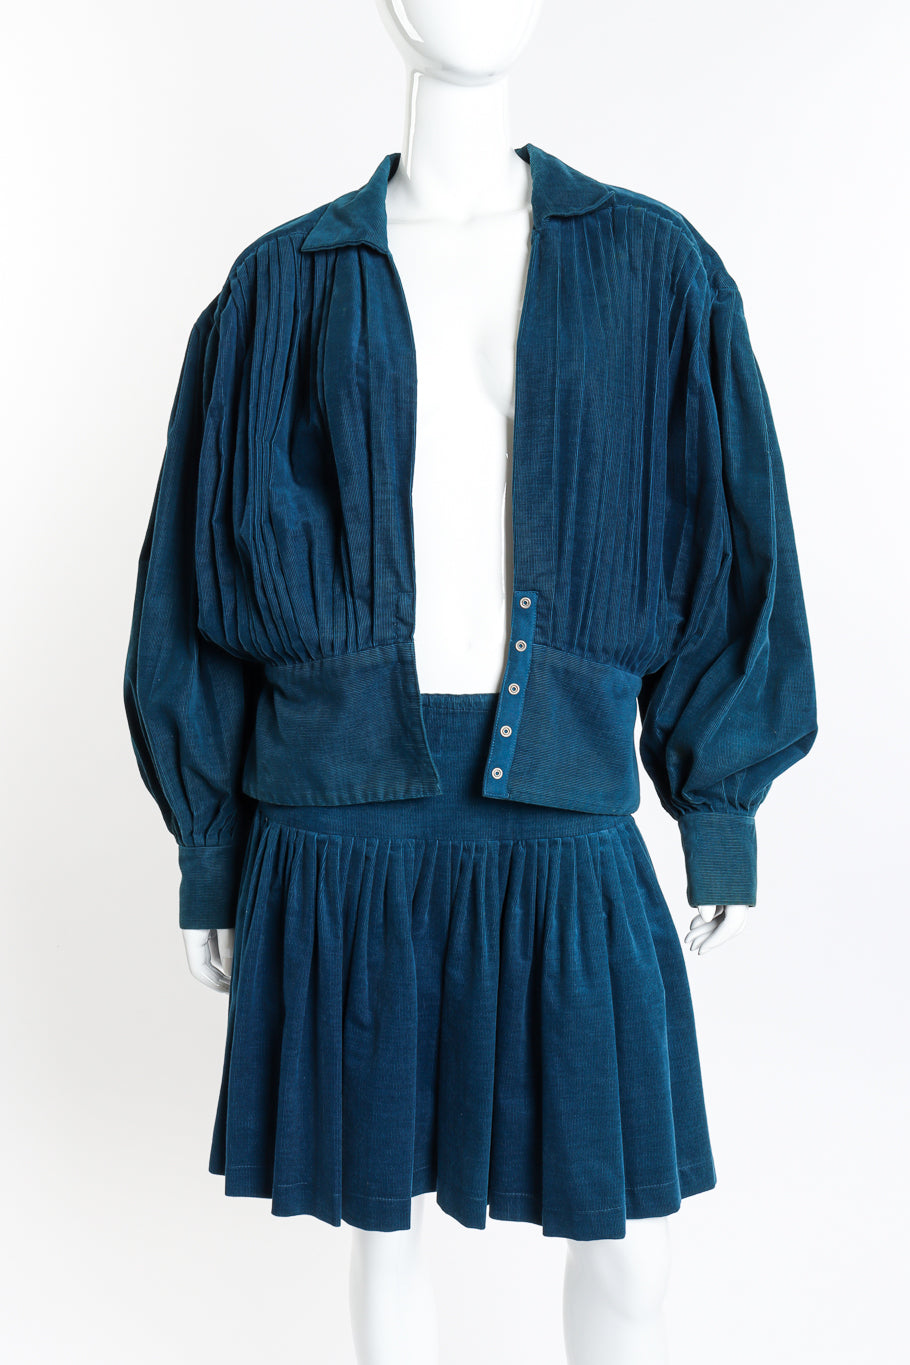 Pleated Corduory Jacket & Skirt Set by Norma Kamali on mannequin jacket open @recess la